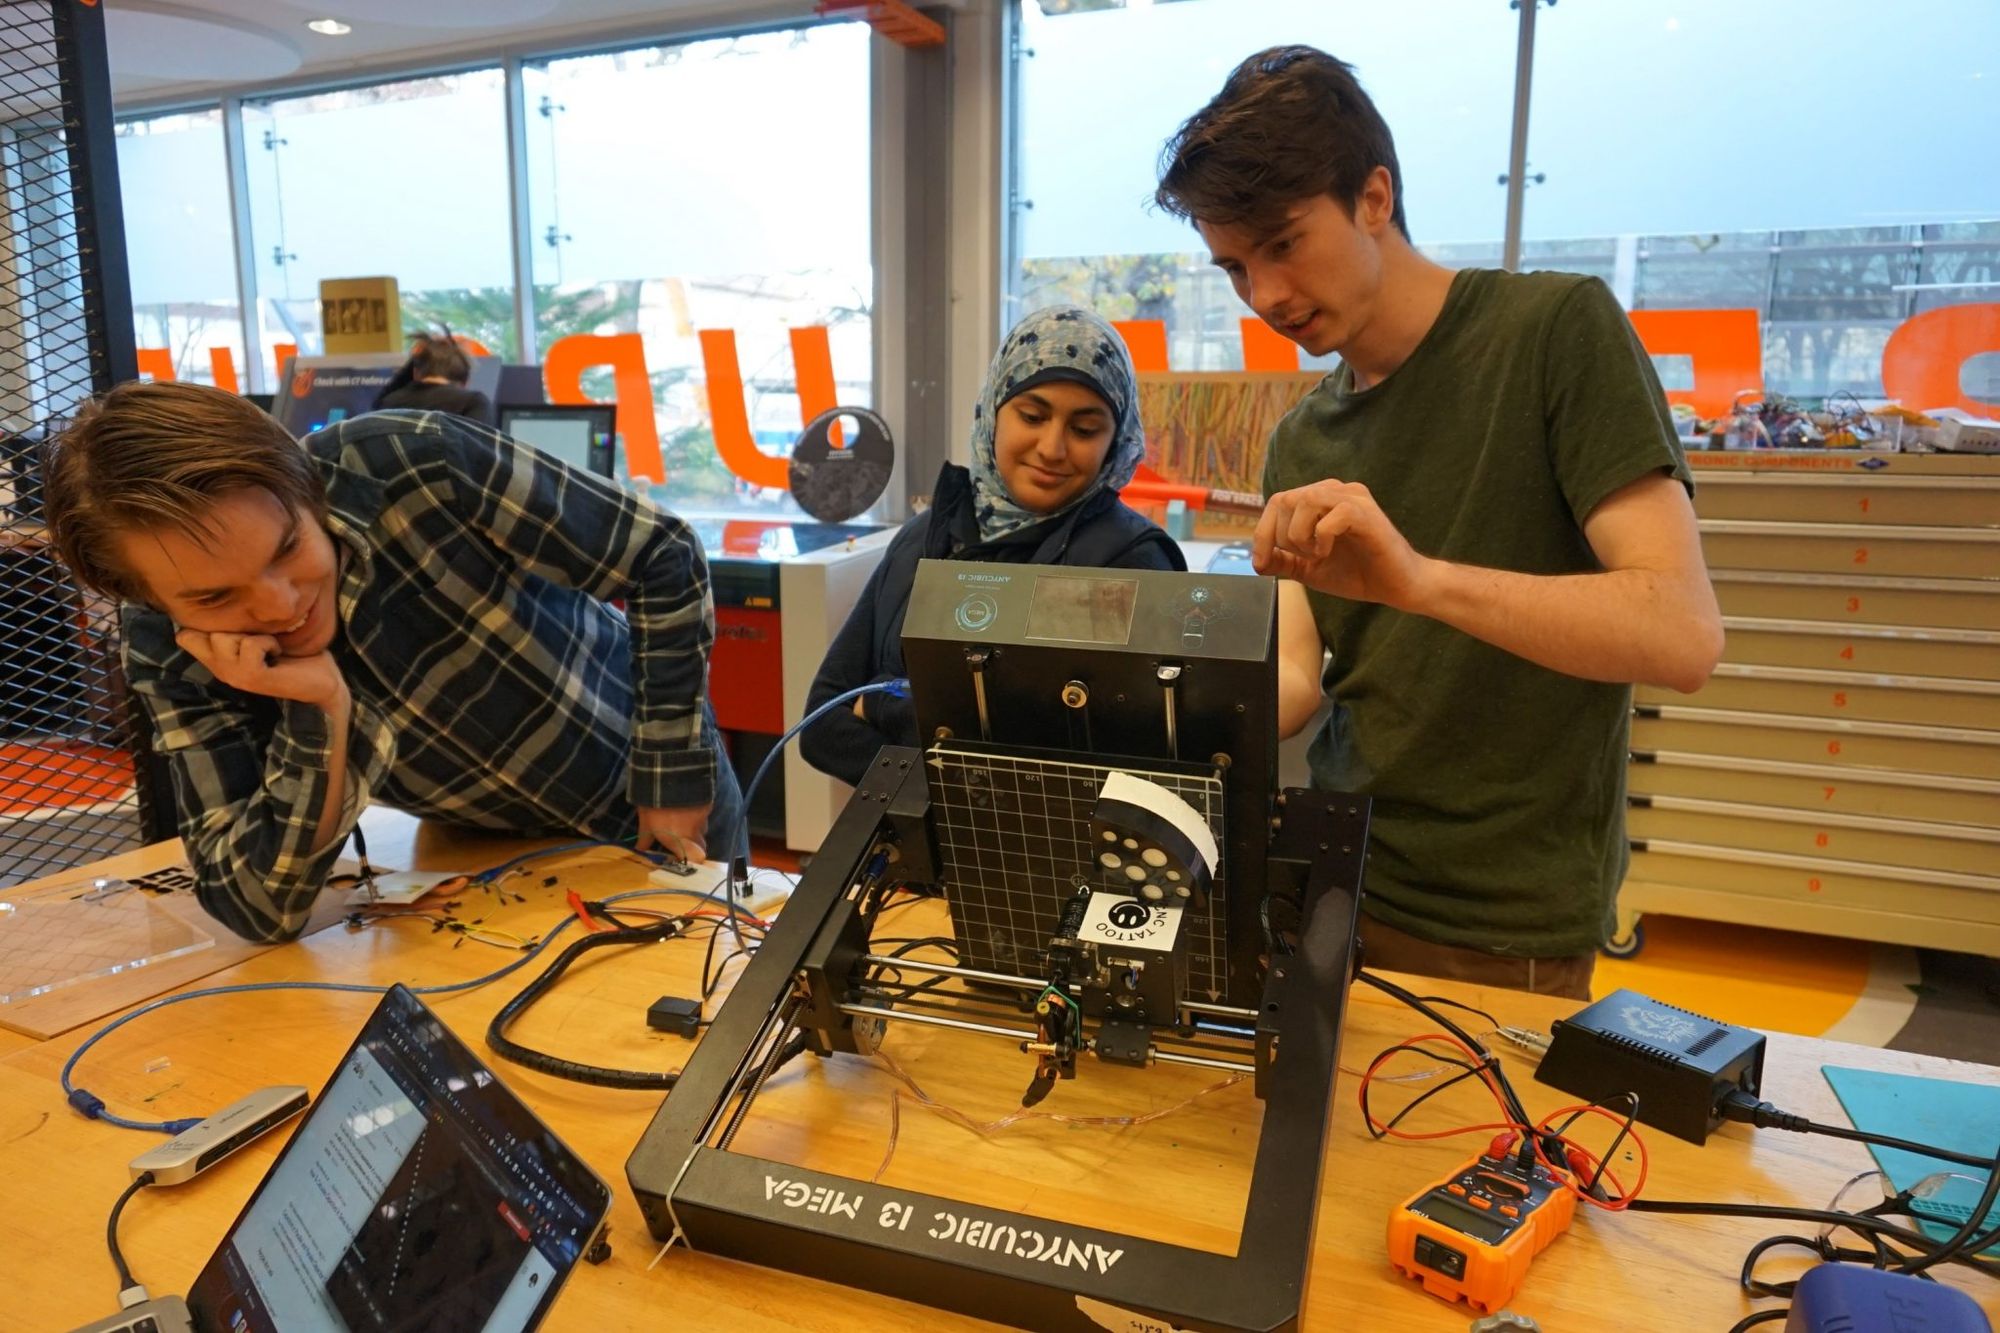 Maker Club members tinkering with a 3D Printer